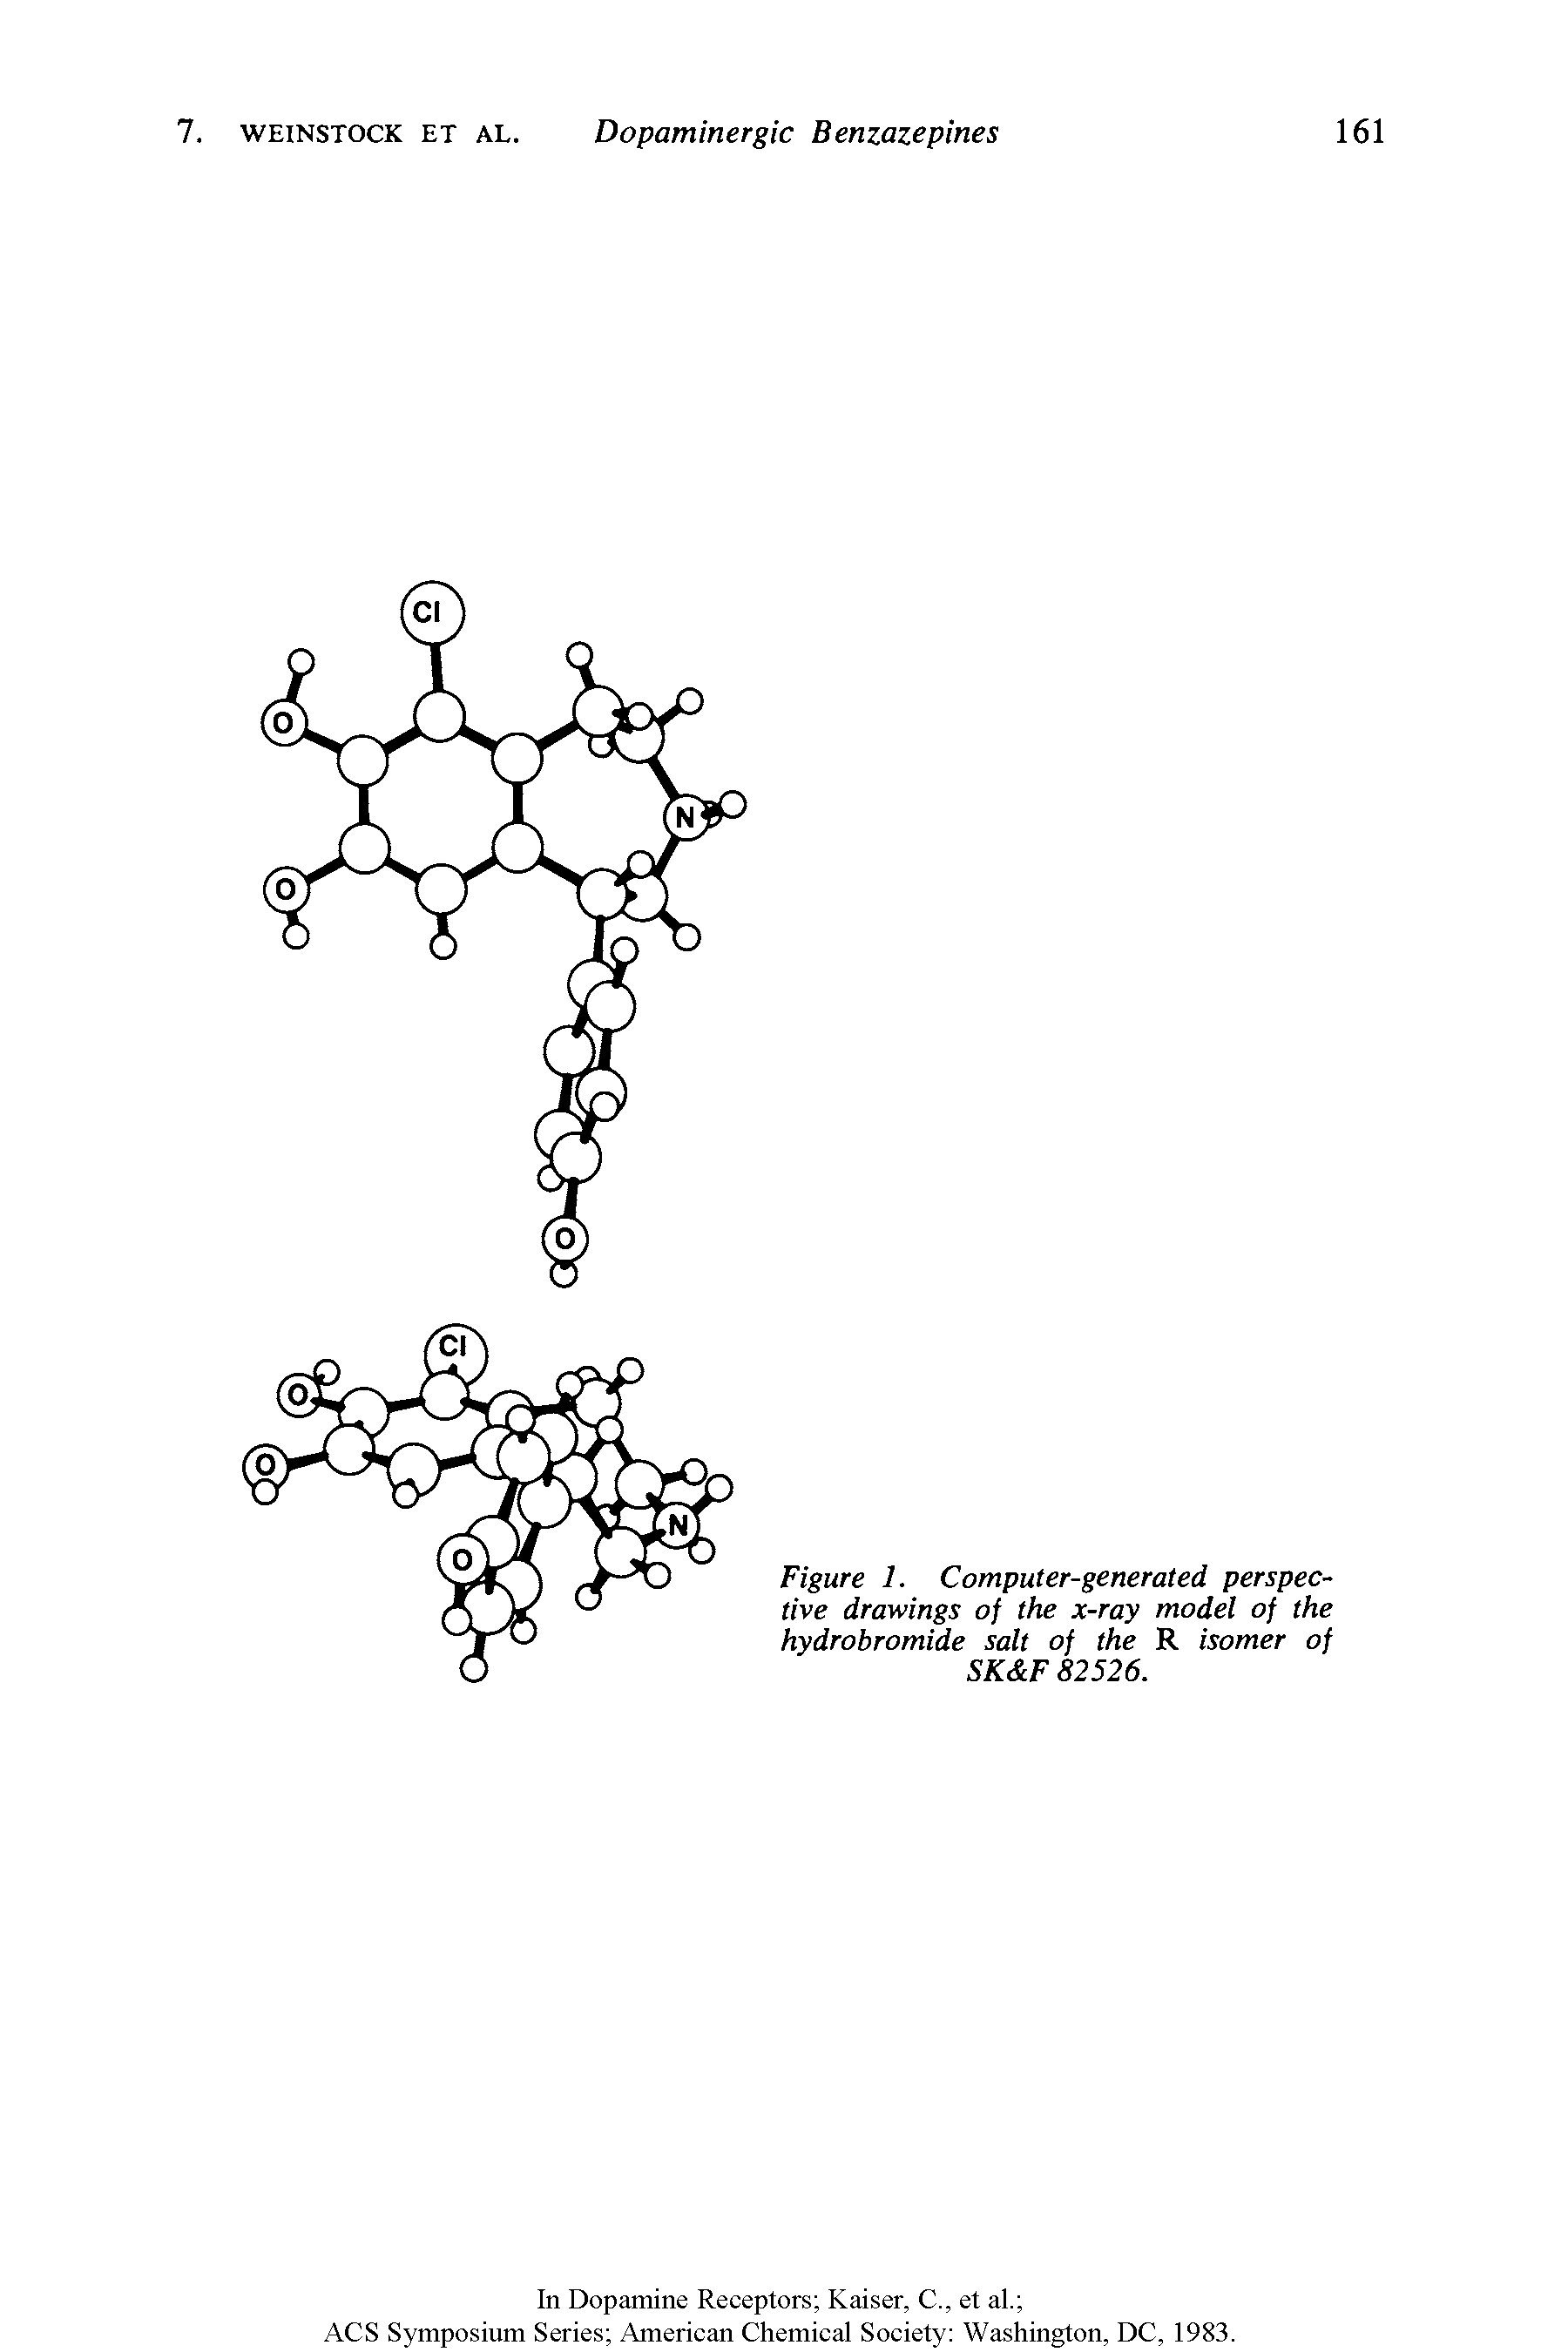 Figure 1. Computer-generated perspective drawings of the x-ray model of the hydrobromide salt of the R isomer of SK F 82526.